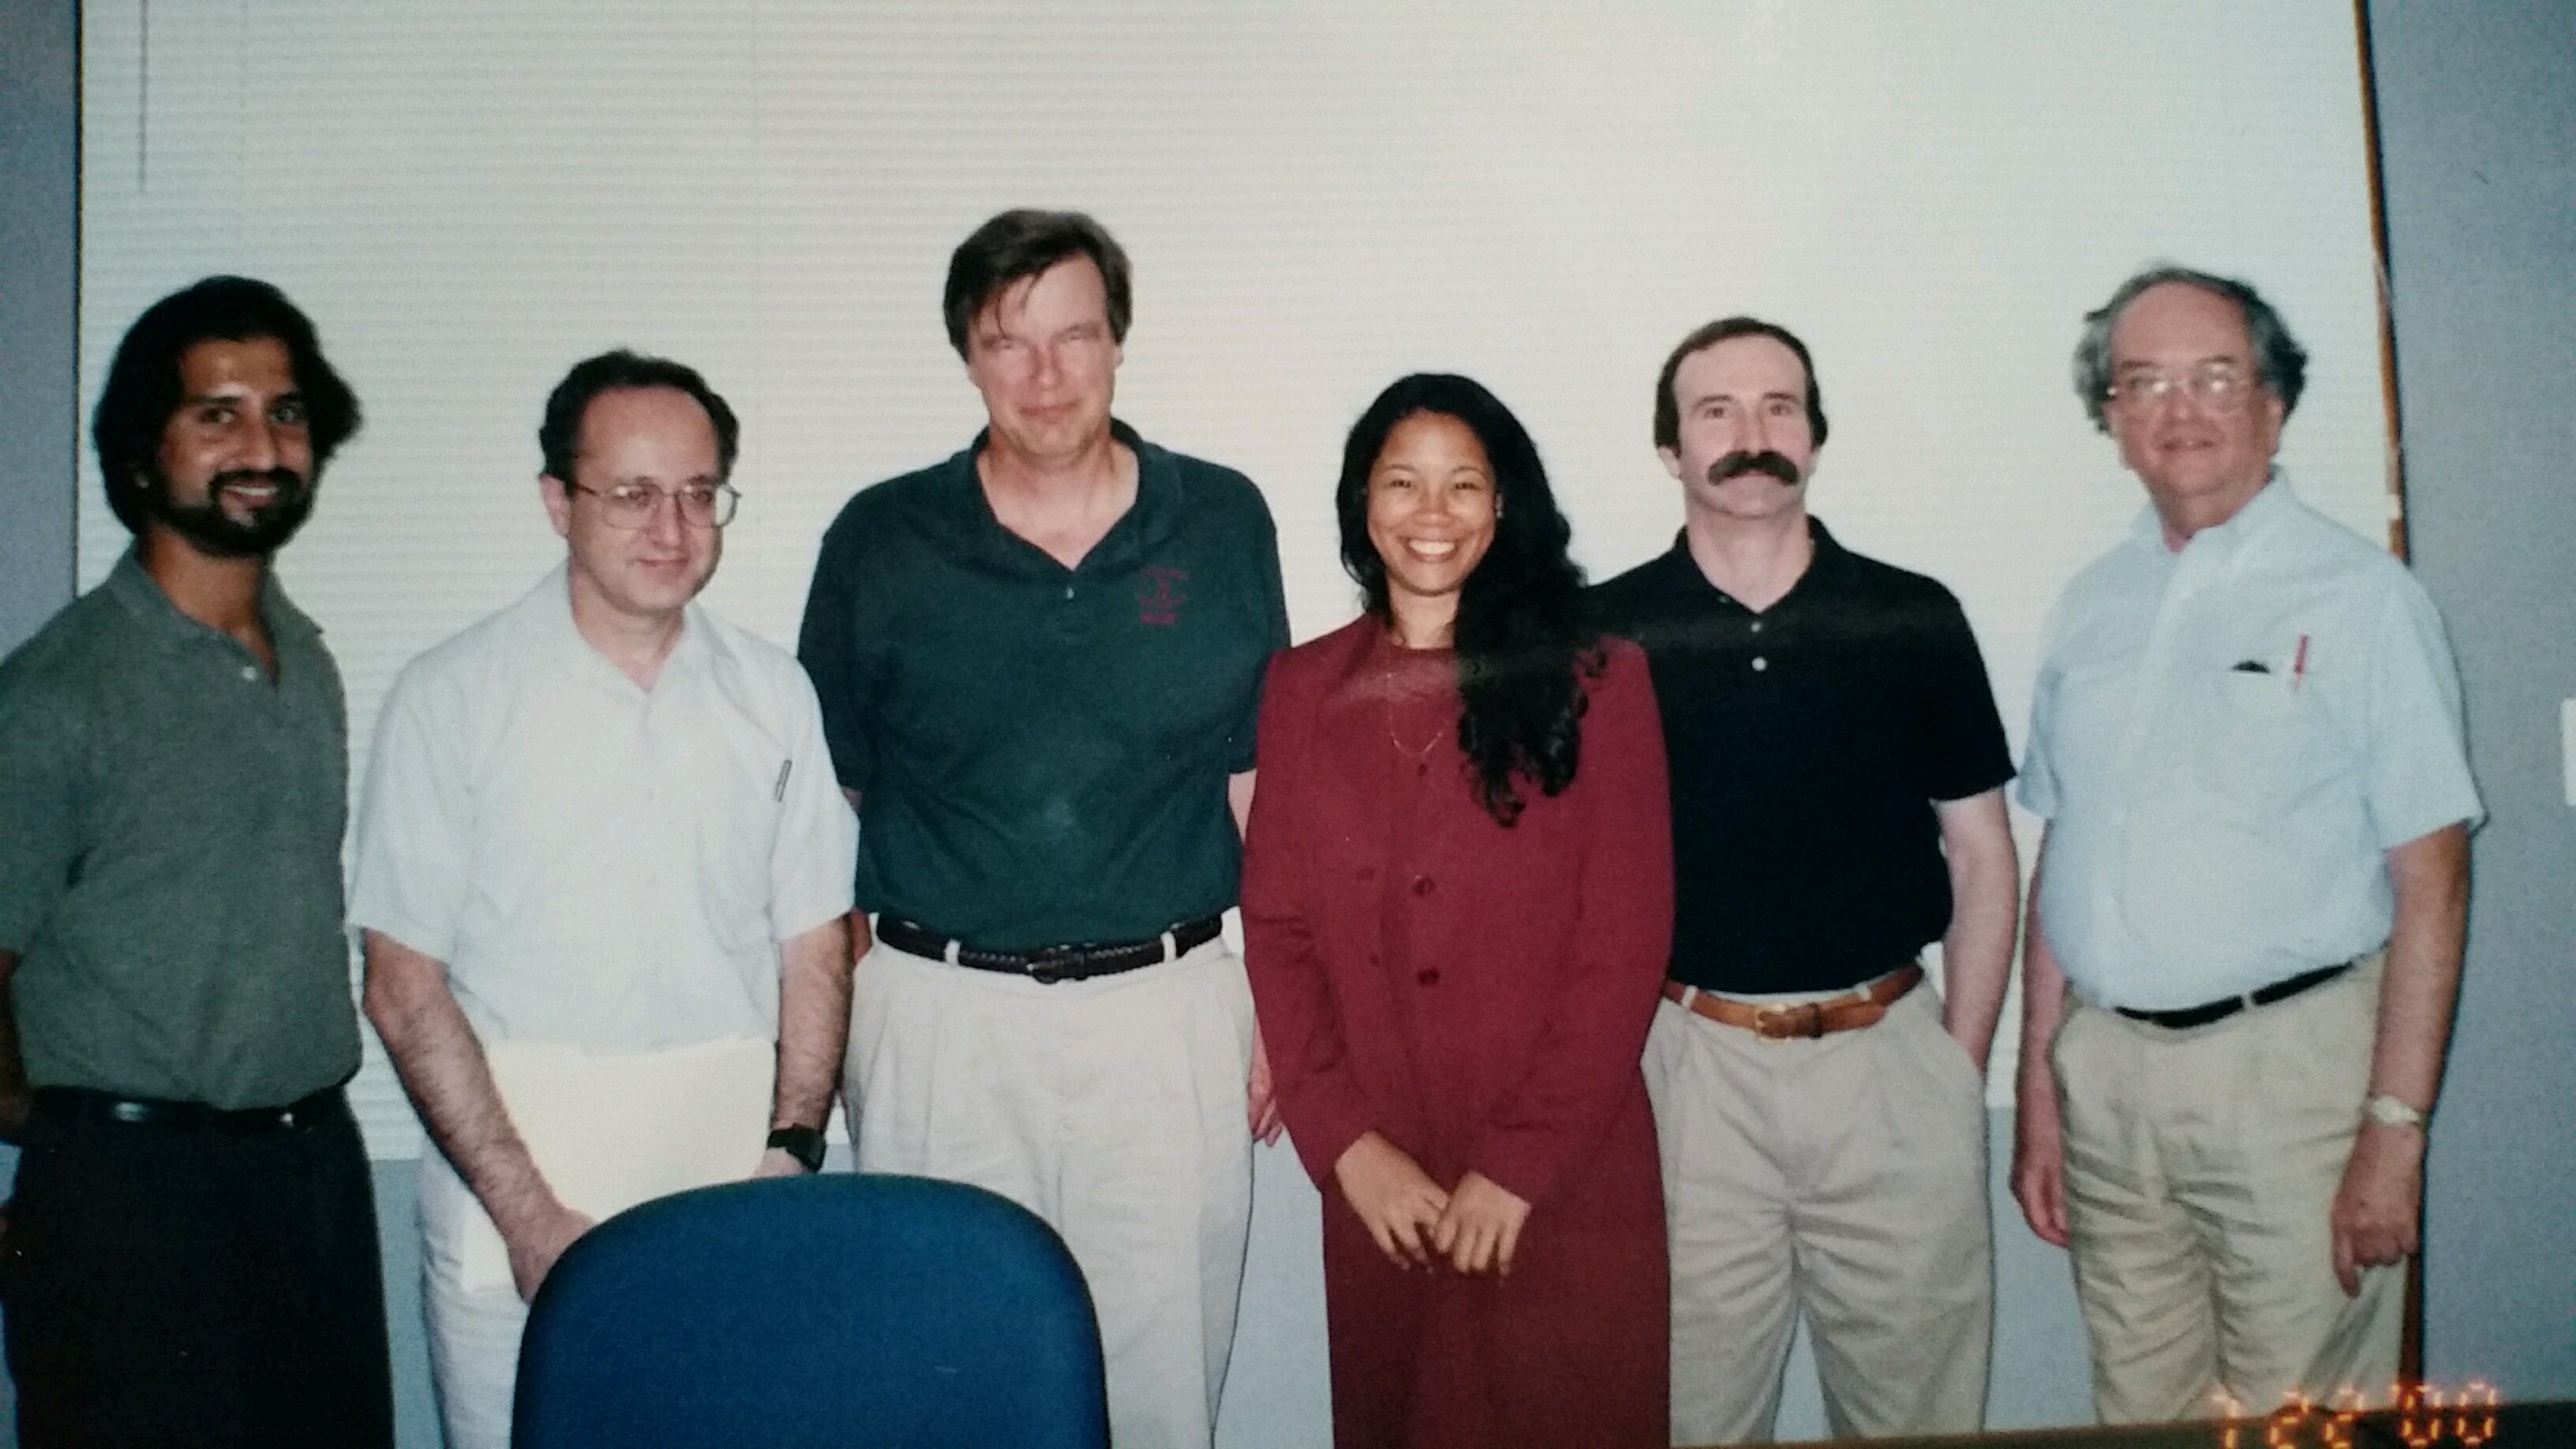 Tasha Inniss at her final thesis defense on July 21, 2000. Photo courtesy of Tasha Inniss. Click image to download hi-res version.